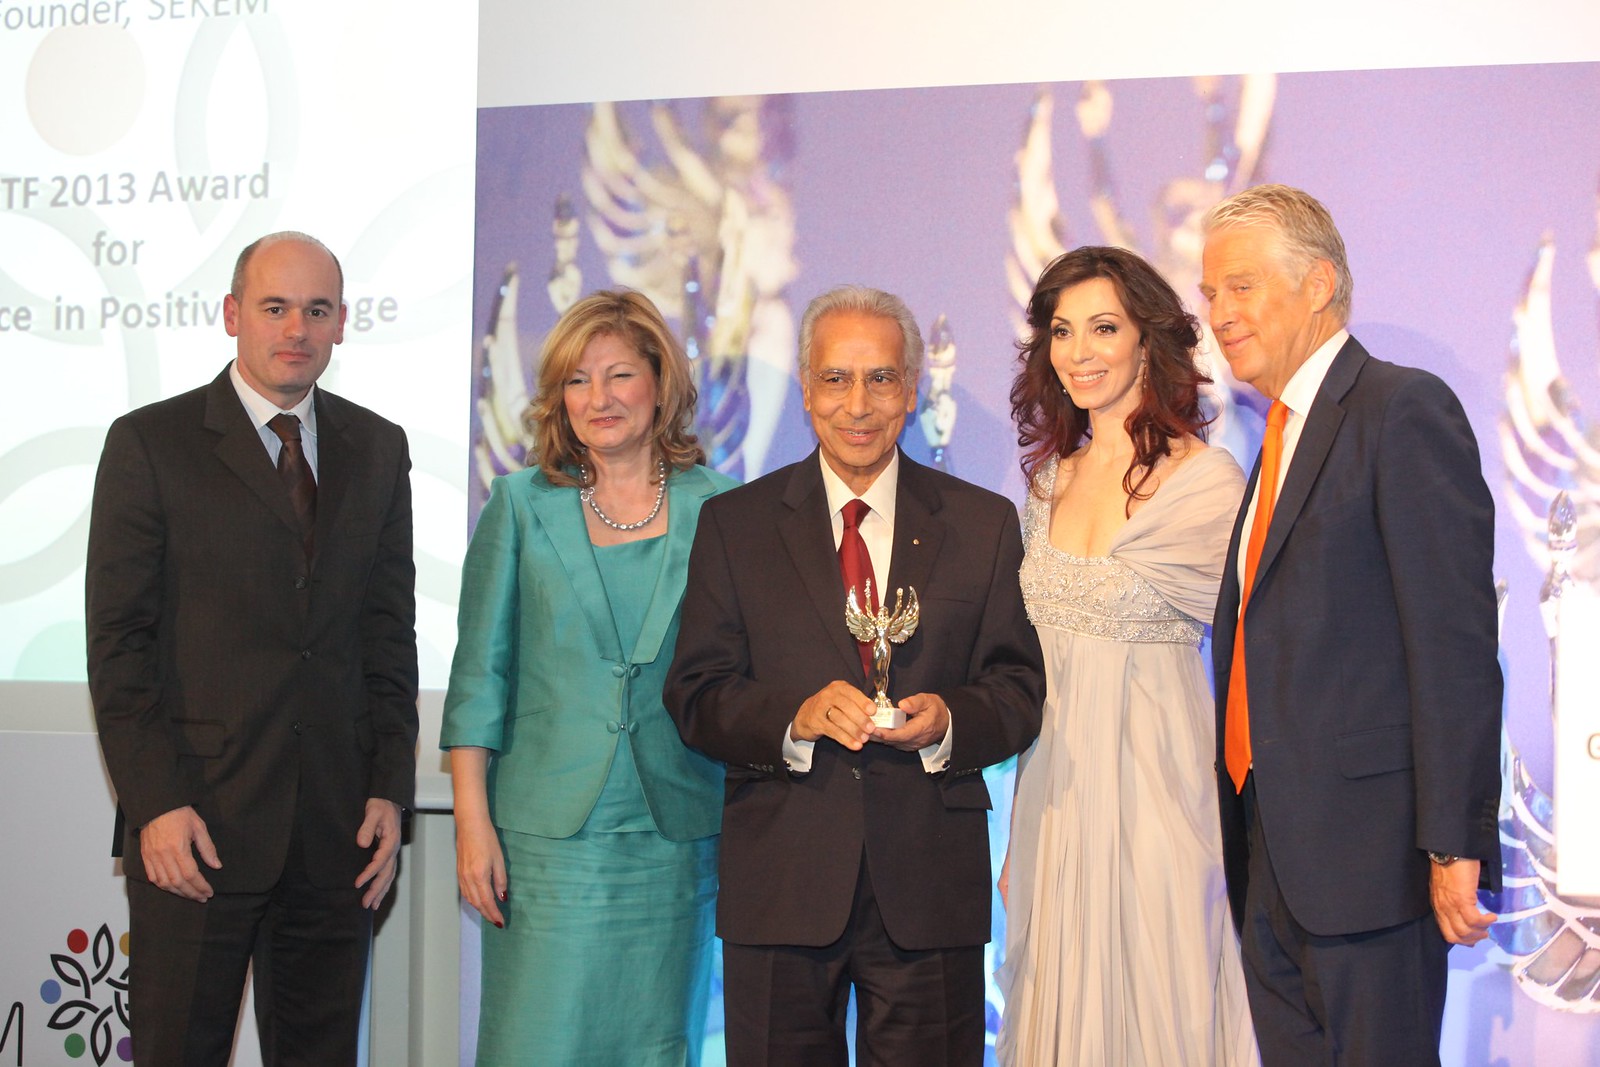 Dr Ibrahim Abouleish, GTF 2013 Award for Excellence in Positive Change by CEO Clubs Greece George Sagonas and Georgia Kartsanis